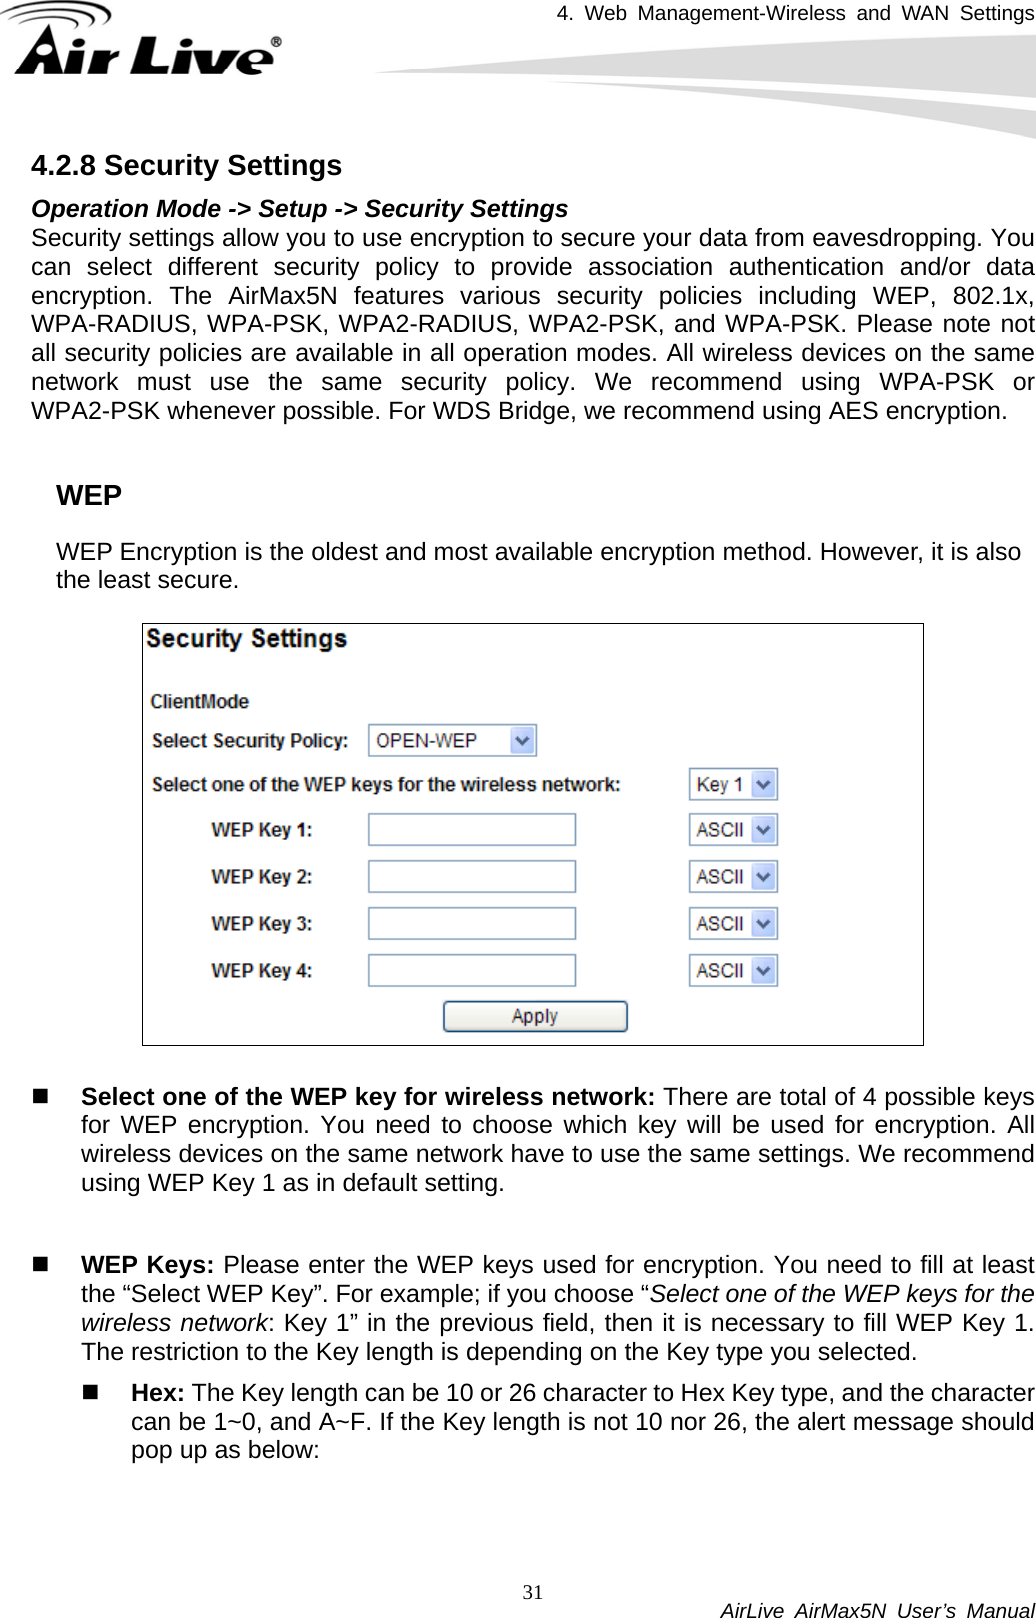 4. Web Management-Wireless and WAN Settings           AirLive AirMax5N User’s Manual 314.2.8 Security Settings Operation Mode -&gt; Setup -&gt; Security Settings   Security settings allow you to use encryption to secure your data from eavesdropping. You can select different security policy to provide association authentication and/or data encryption. The AirMax5N features various security policies including WEP, 802.1x, WPA-RADIUS, WPA-PSK, WPA2-RADIUS, WPA2-PSK, and WPA-PSK. Please note not all security policies are available in all operation modes. All wireless devices on the same network must use the same security policy. We recommend using WPA-PSK or WPA2-PSK whenever possible. For WDS Bridge, we recommend using AES encryption.  WEP WEP Encryption is the oldest and most available encryption method. However, it is also the least secure.       Select one of the WEP key for wireless network: There are total of 4 possible keys for WEP encryption. You need to choose which key will be used for encryption. All wireless devices on the same network have to use the same settings. We recommend using WEP Key 1 as in default setting.   WEP Keys: Please enter the WEP keys used for encryption. You need to fill at least the “Select WEP Key”. For example; if you choose “Select one of the WEP keys for the wireless network: Key 1” in the previous field, then it is necessary to fill WEP Key 1. The restriction to the Key length is depending on the Key type you selected.  Hex: The Key length can be 10 or 26 character to Hex Key type, and the character can be 1~0, and A~F. If the Key length is not 10 nor 26, the alert message should pop up as below: 